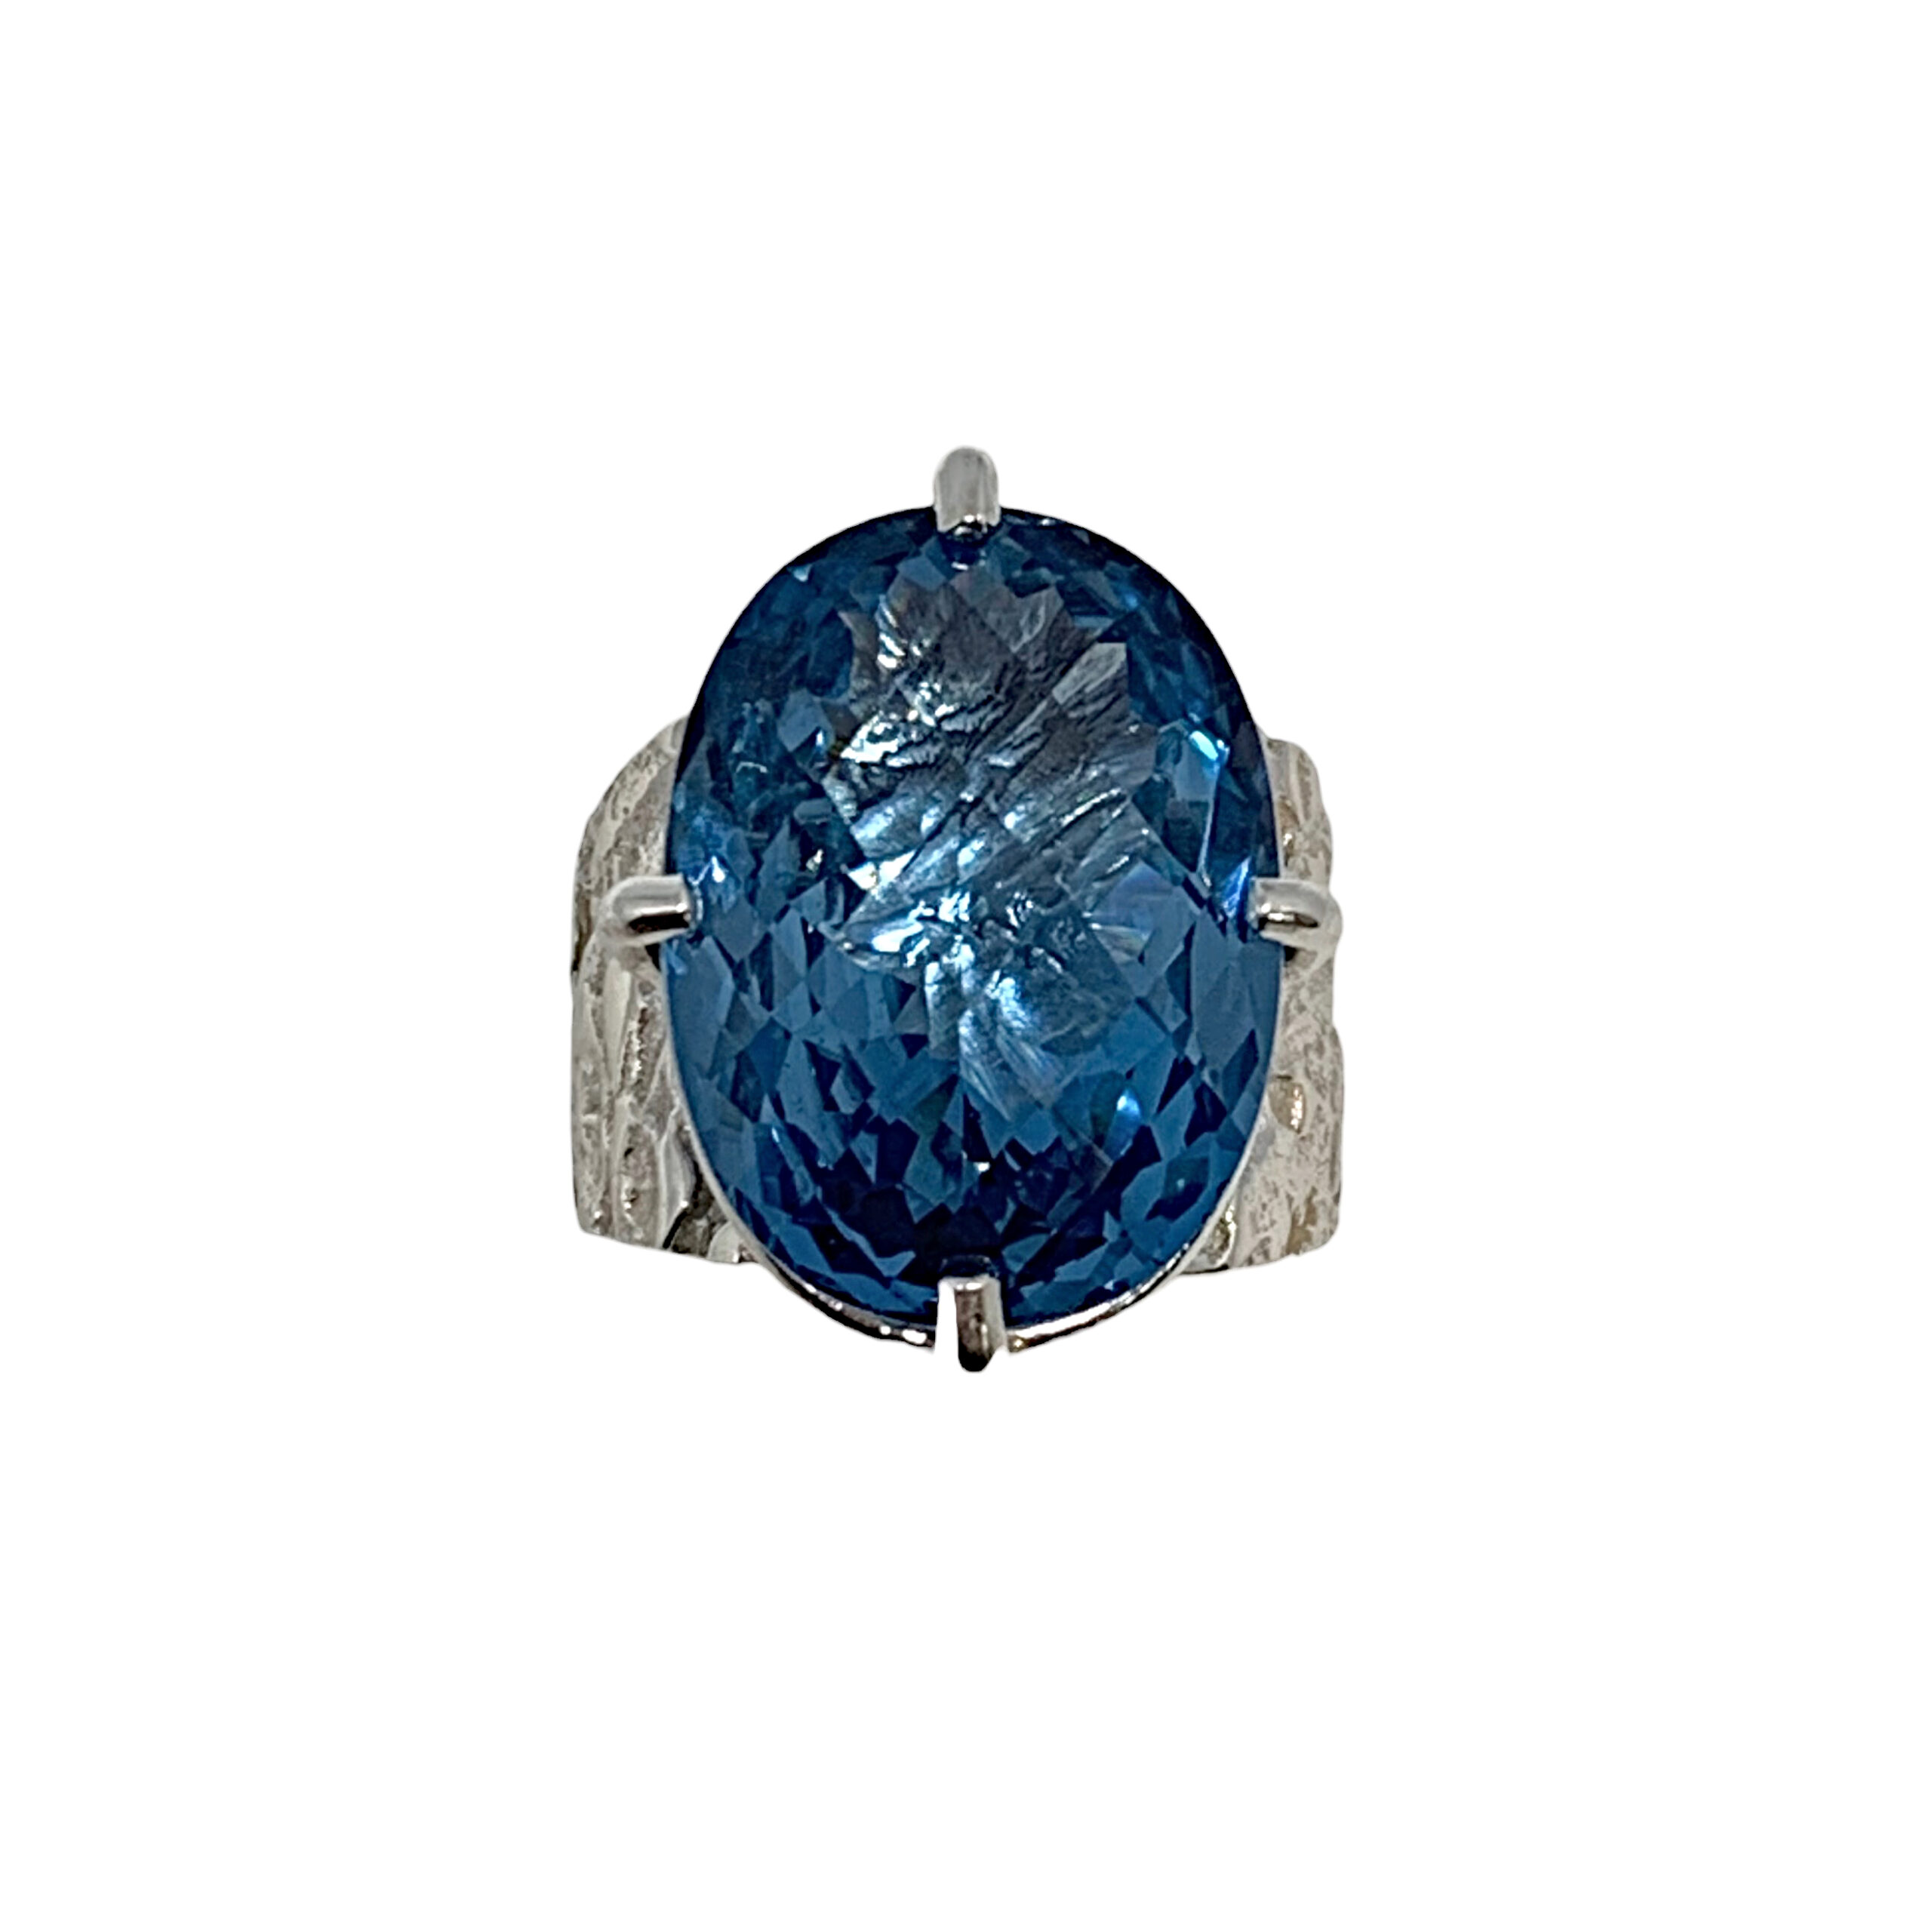 Handmade silver + 25 ct oval London blue topaz ring by A&R Jewellery | Effusion Art Gallery, Invermere BC